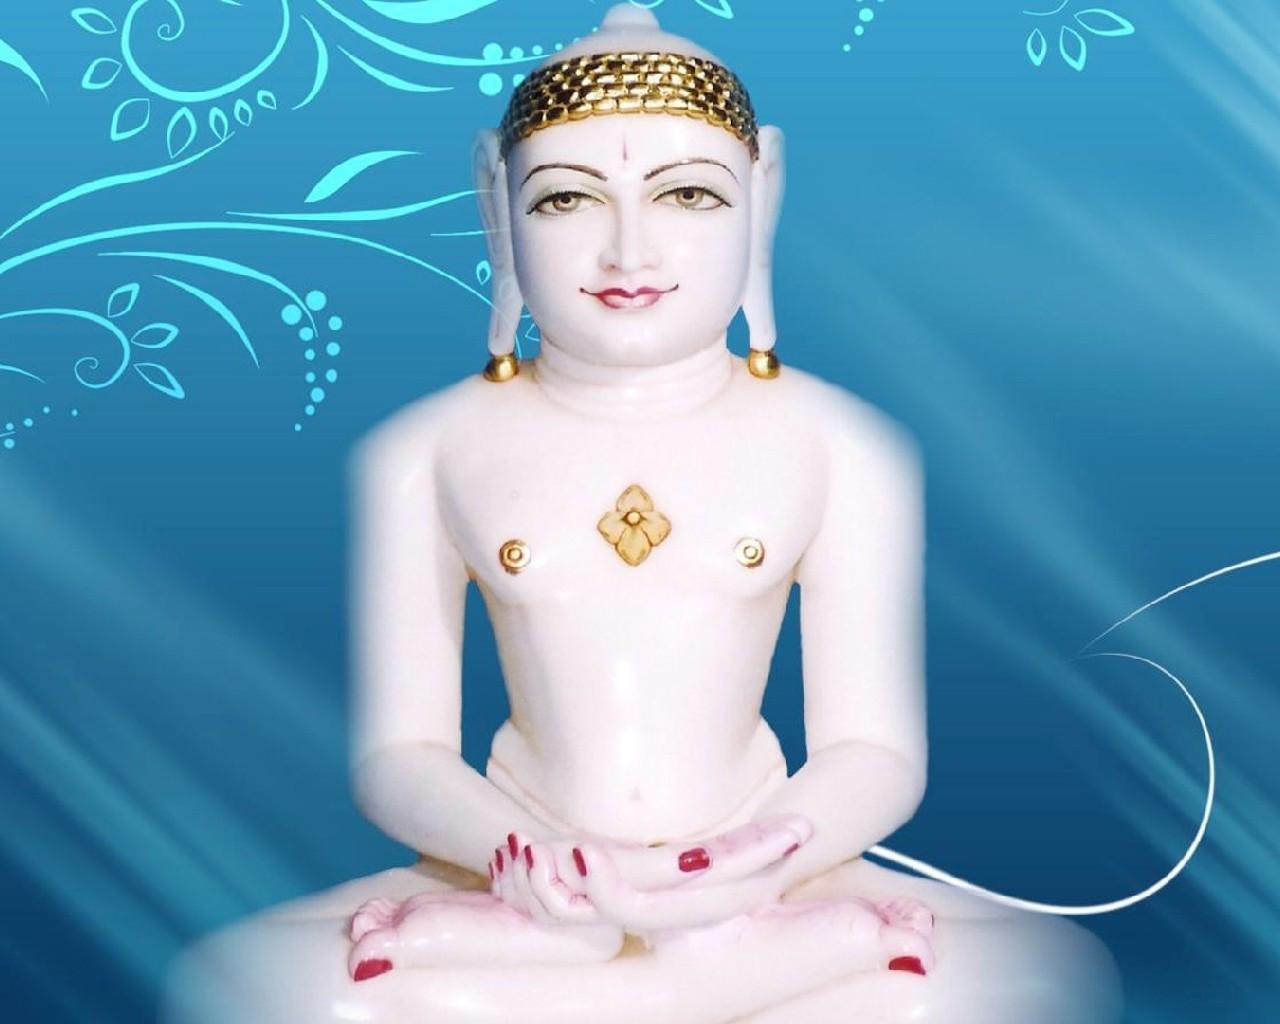 Jainism Wallpaper for Android